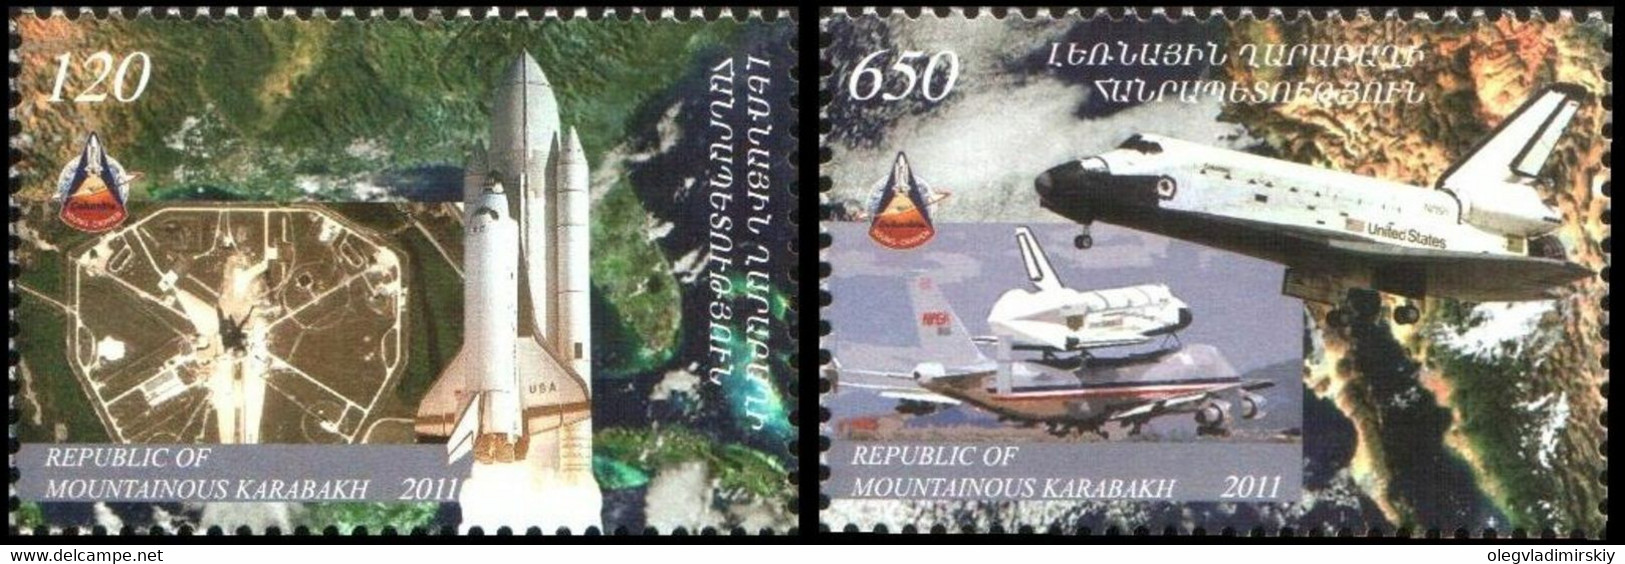 Armenia Mountain Karabakh Artsakh 2011 30th Anniversary Of The First Space Shuttle Launch Set Of 2 Stamps Mint - Estados Unidos